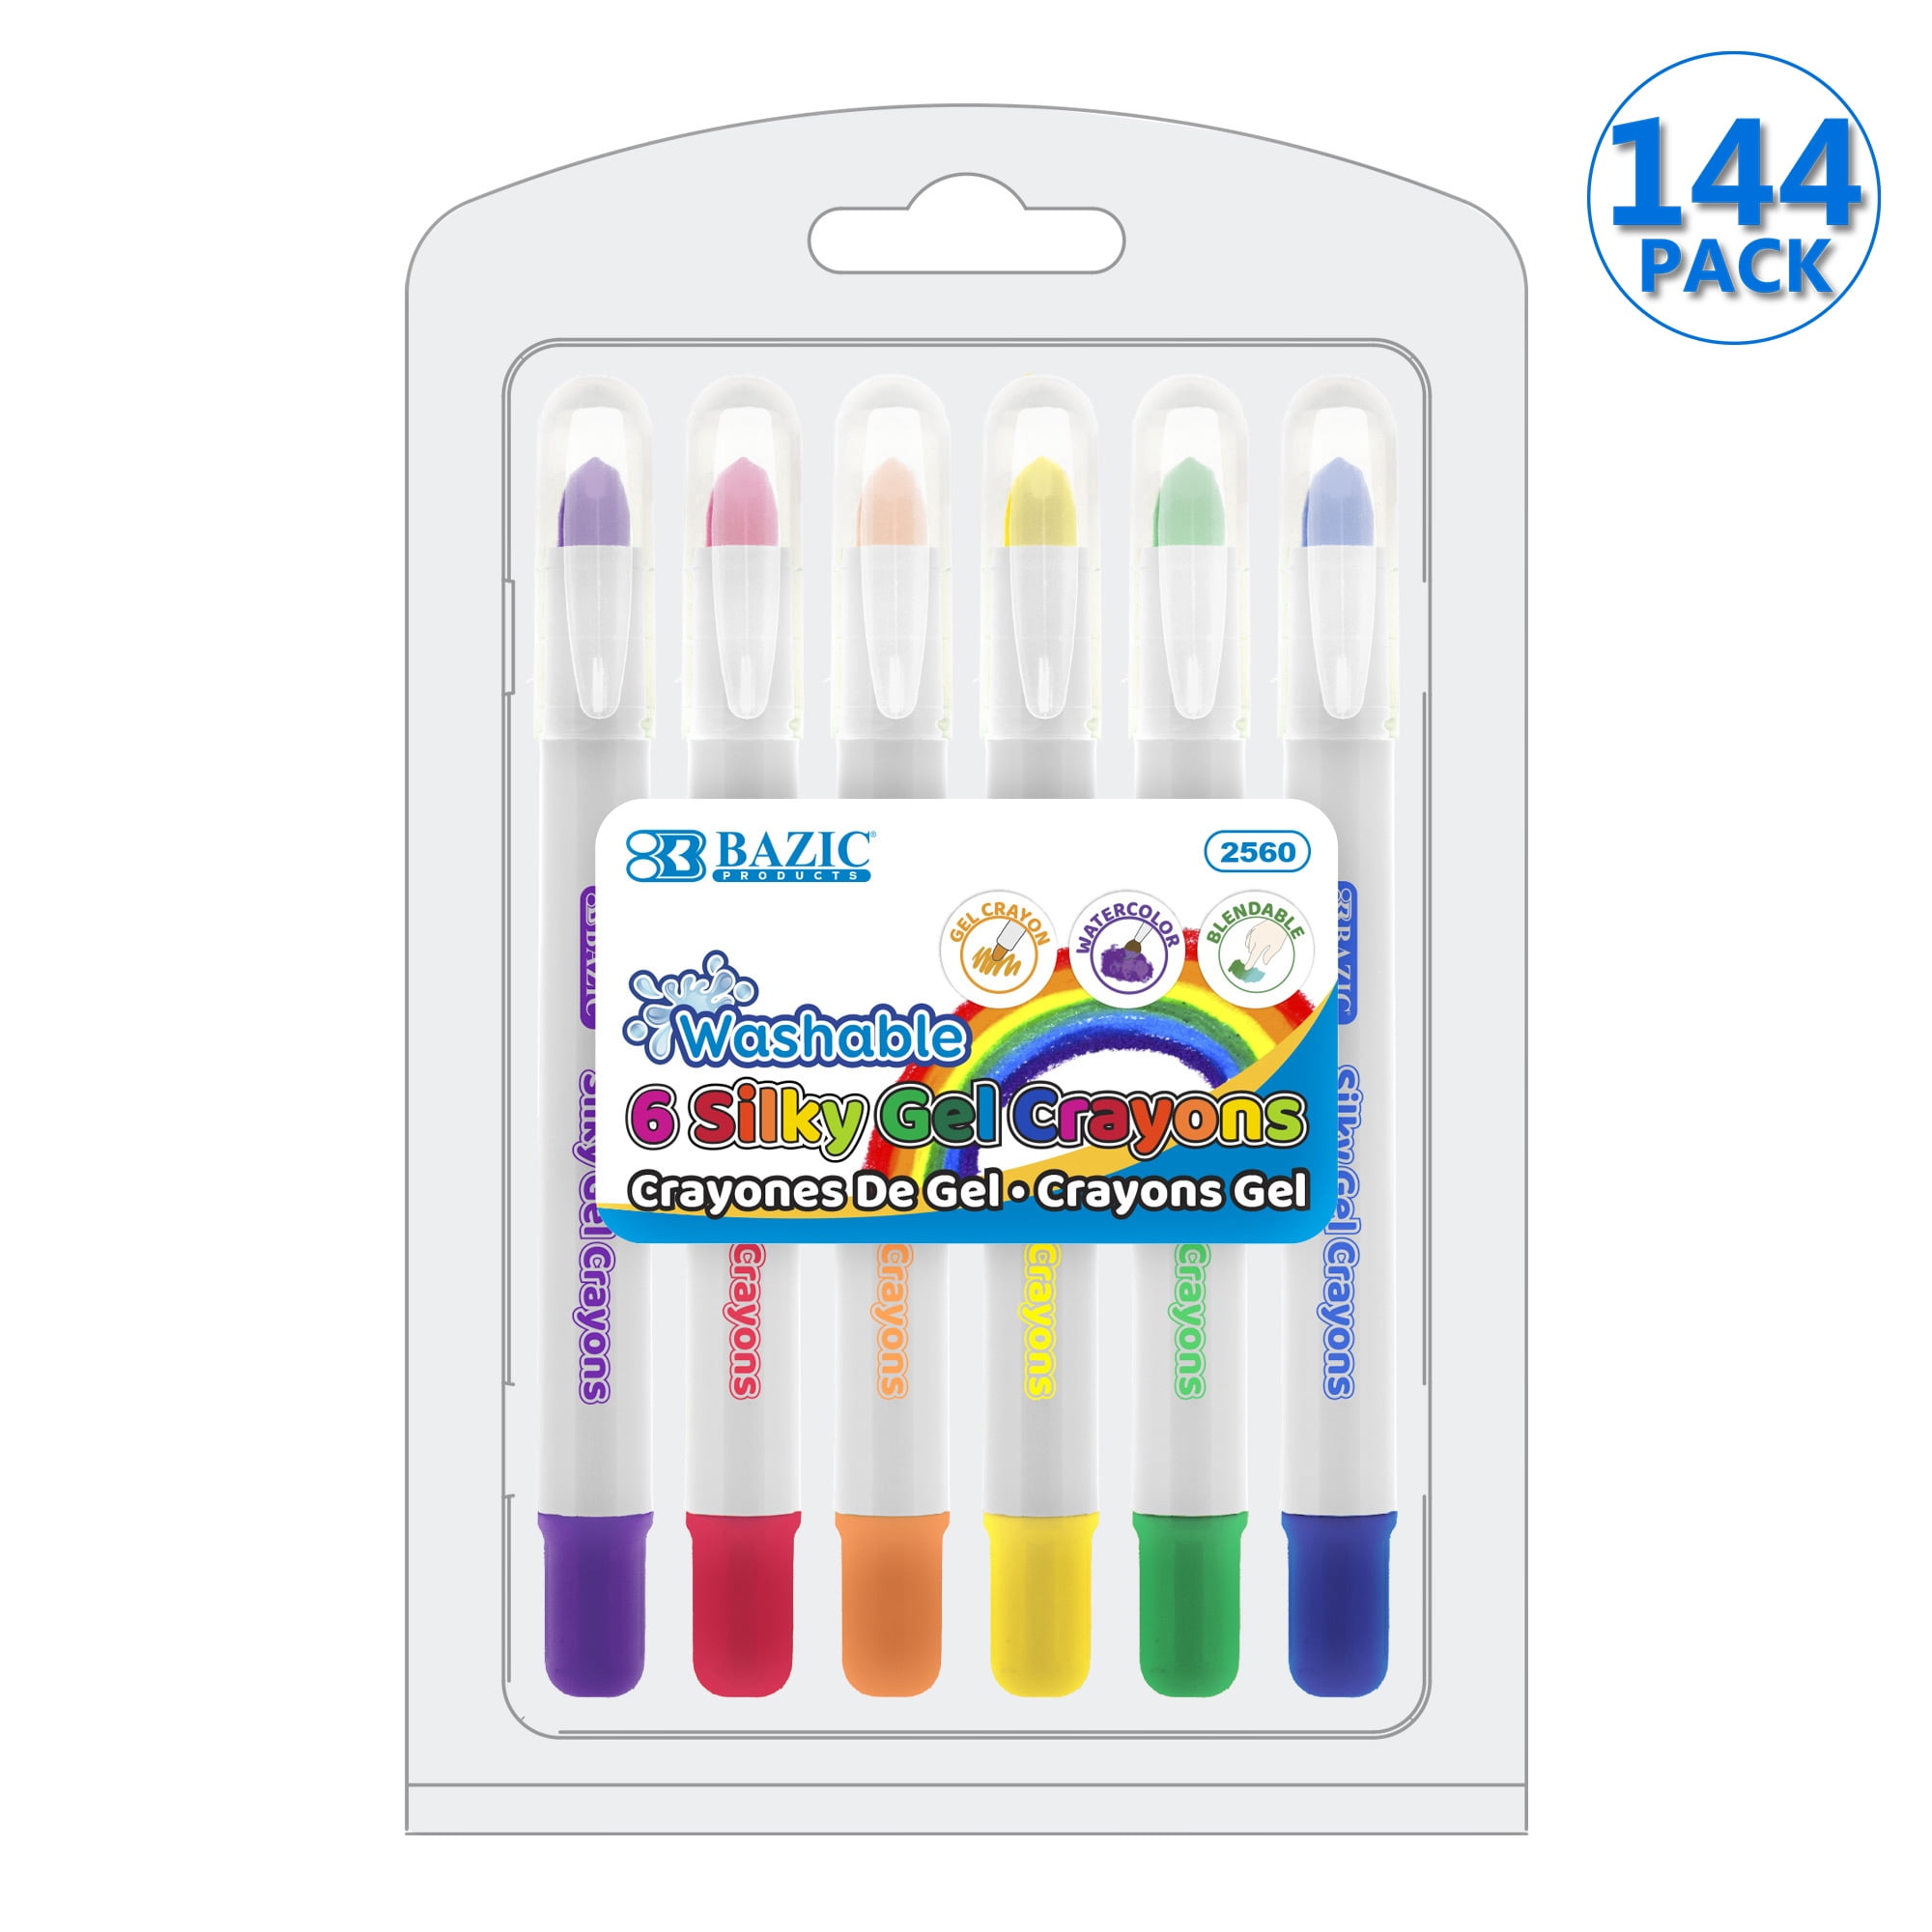 DOODLE HOG NOYO 36 Colors Gel Crayons for Toddlers and Kids - Non Toxic - 3  in 1 Washable Bolder Crayons | Pastel Watercolor Paint Effects | Ages 3